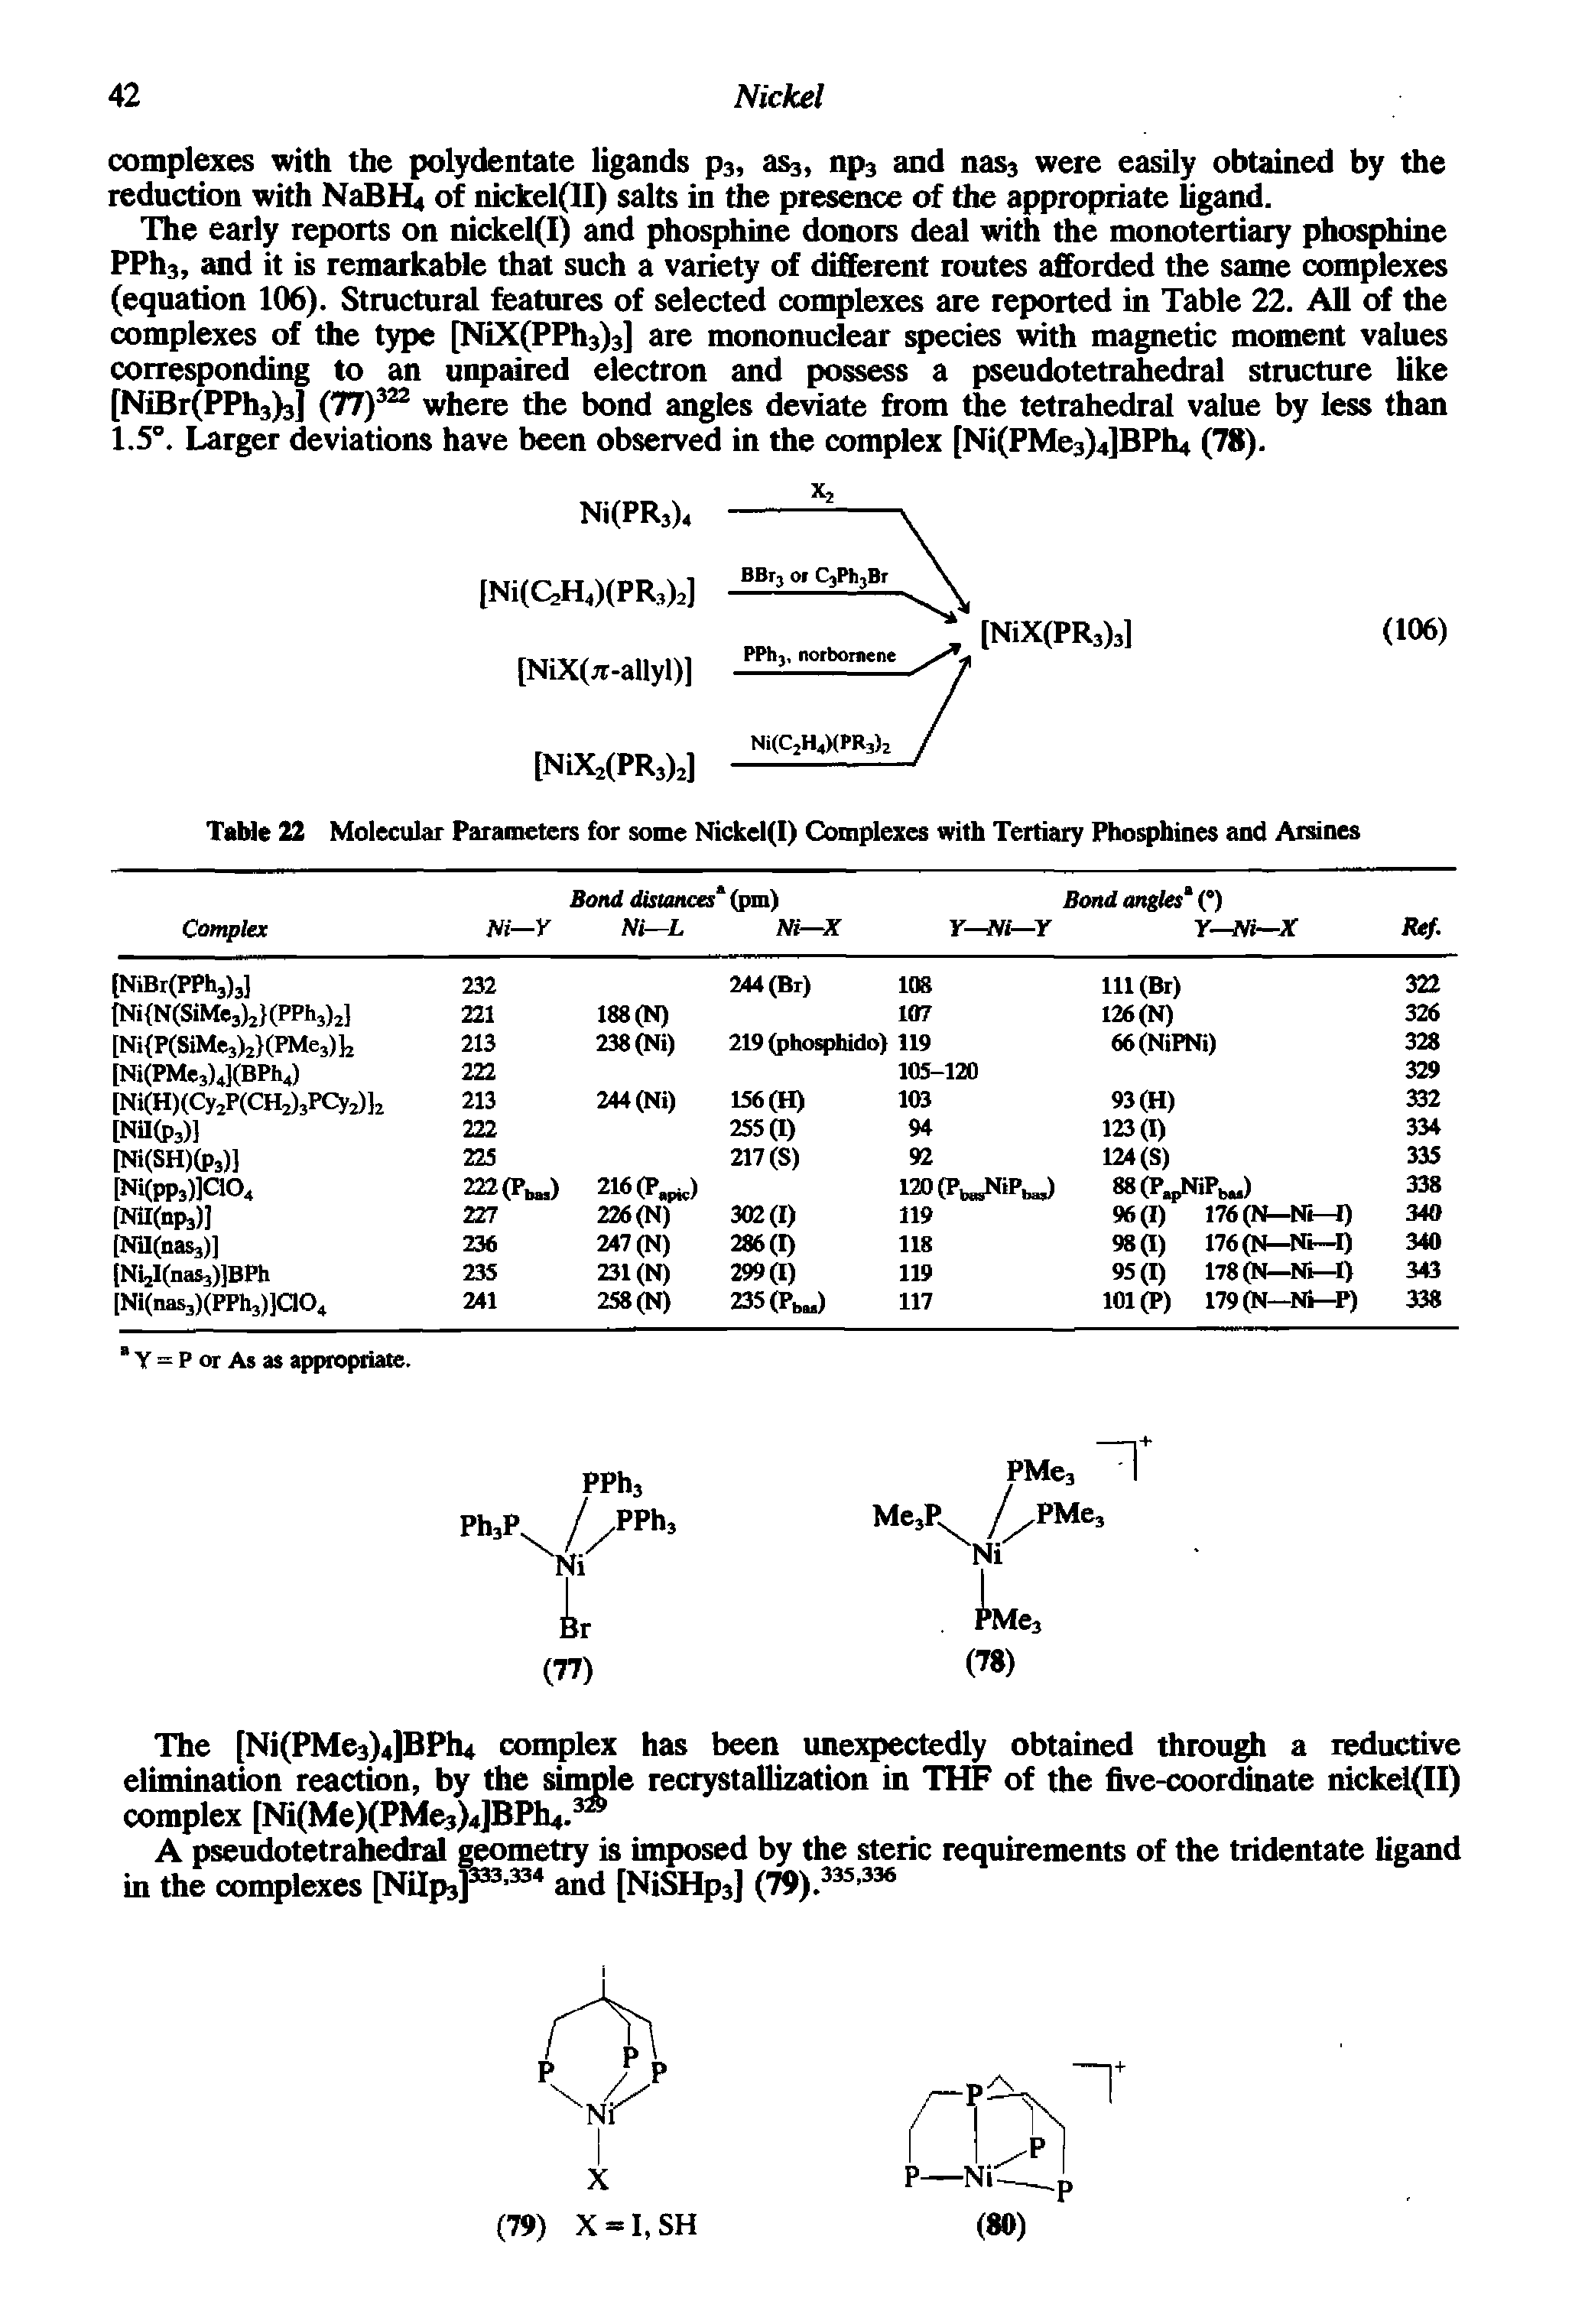 Table 22 Molecular Parameters for some Nickel(I) Complexes with Tertiary Phosphines and Arsines...